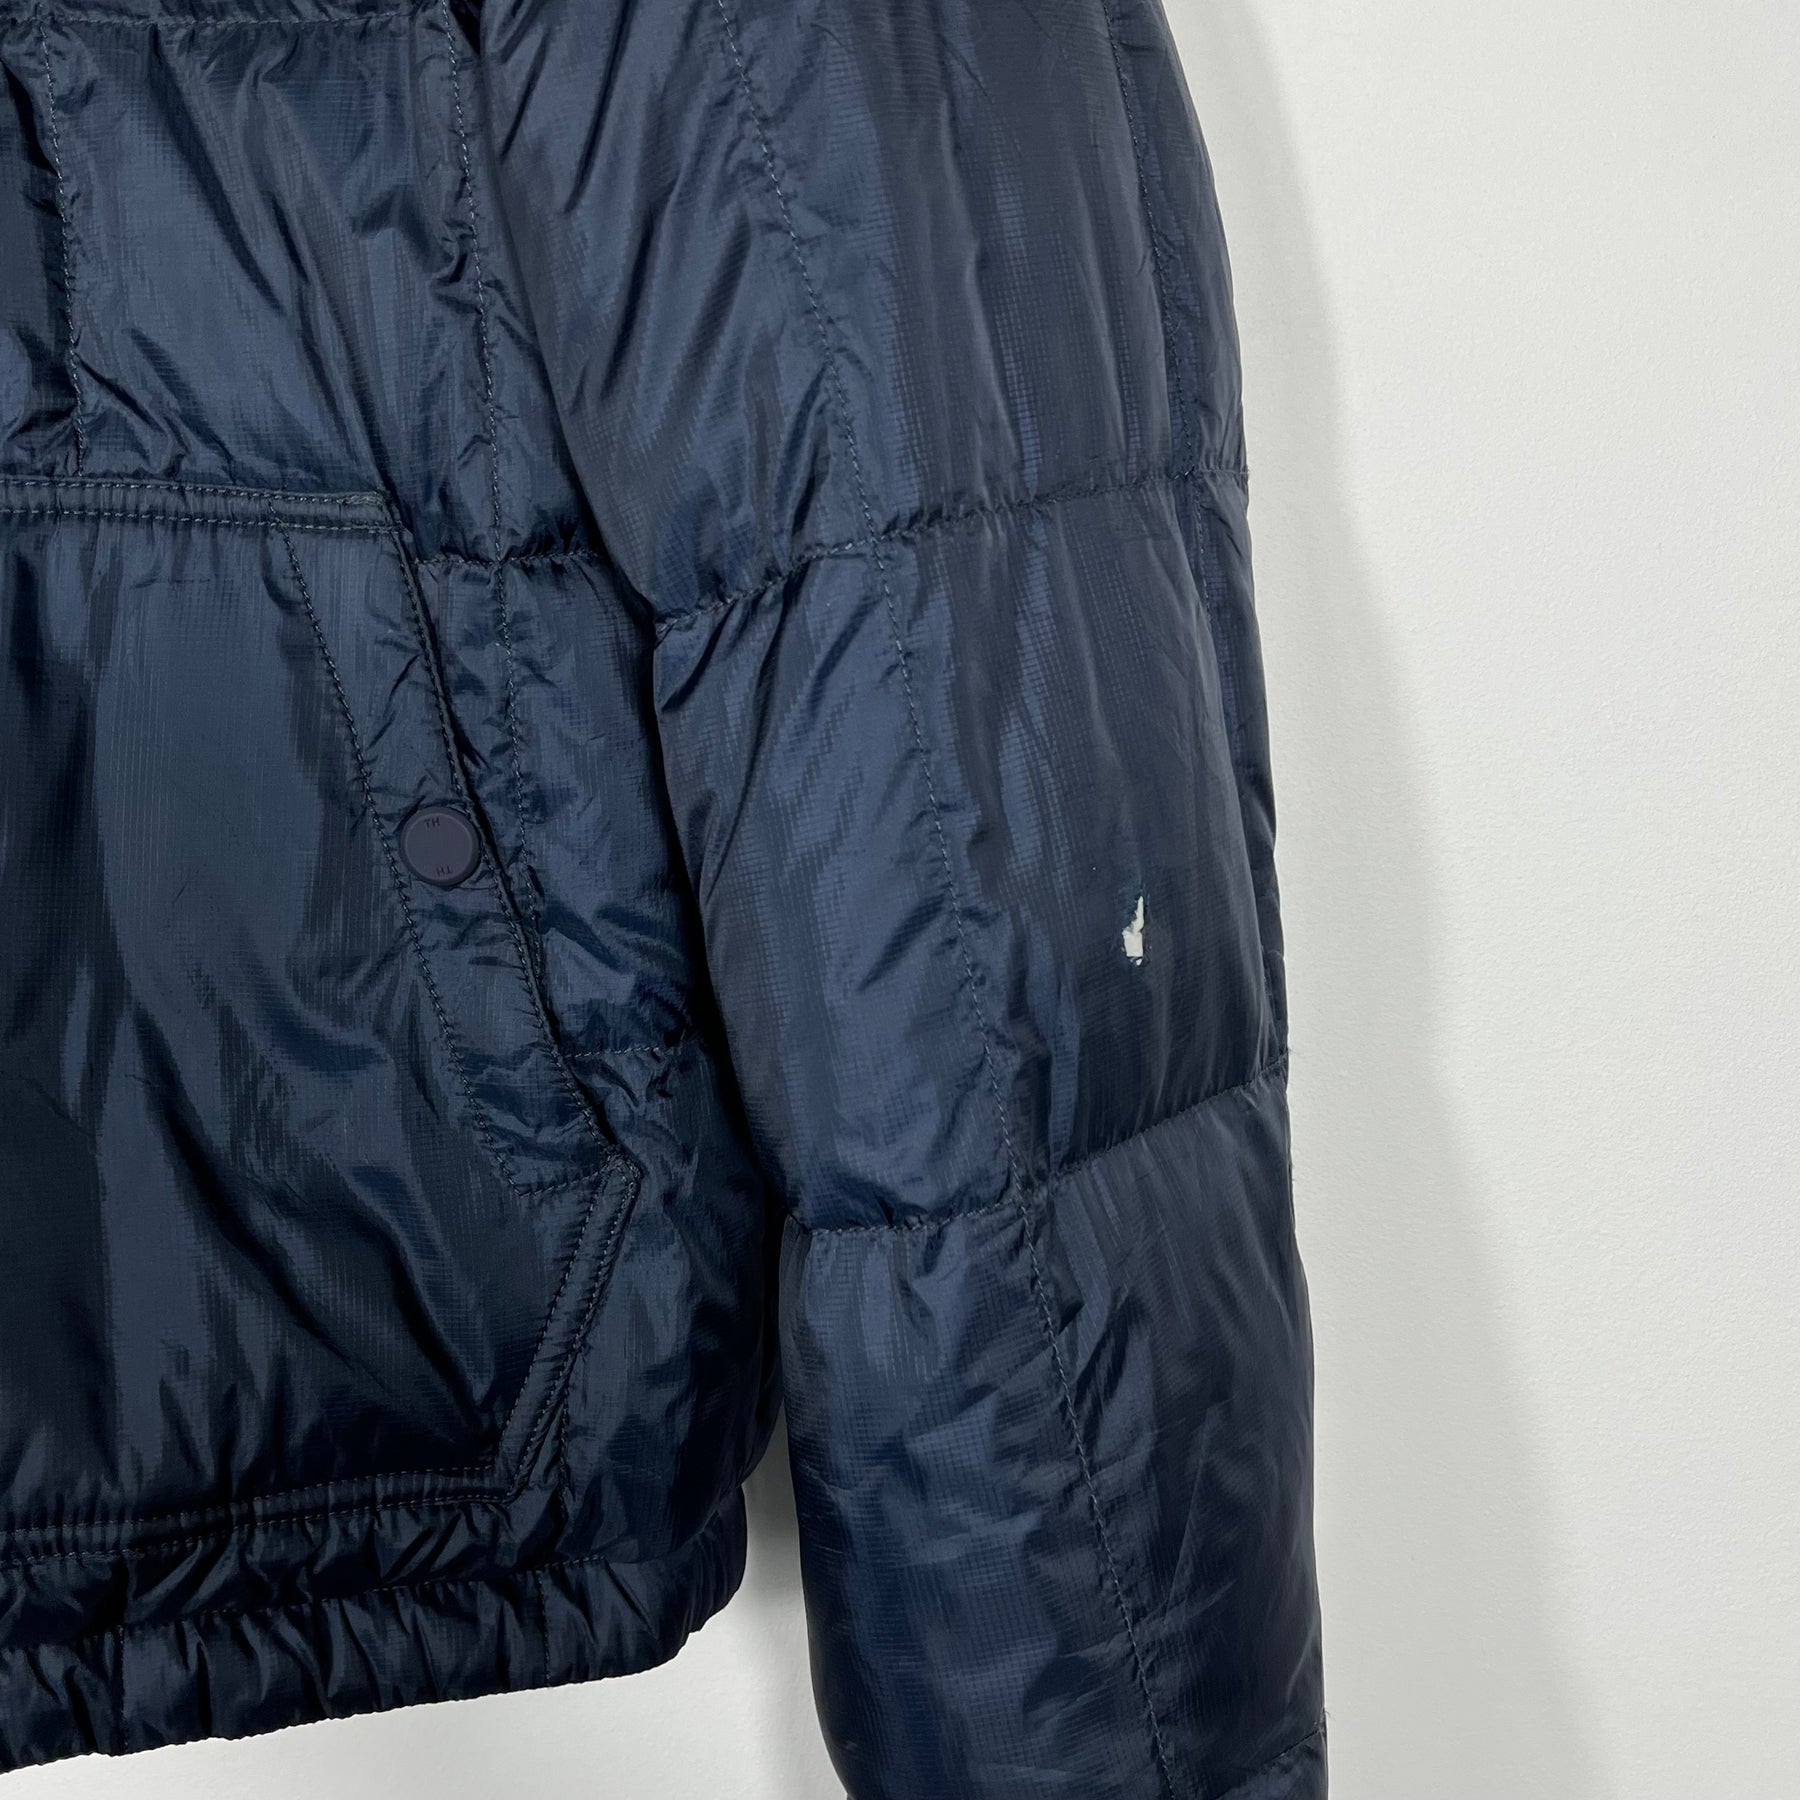 Tommy Hilfiger Insulated Reversible Jacket - Men's XS